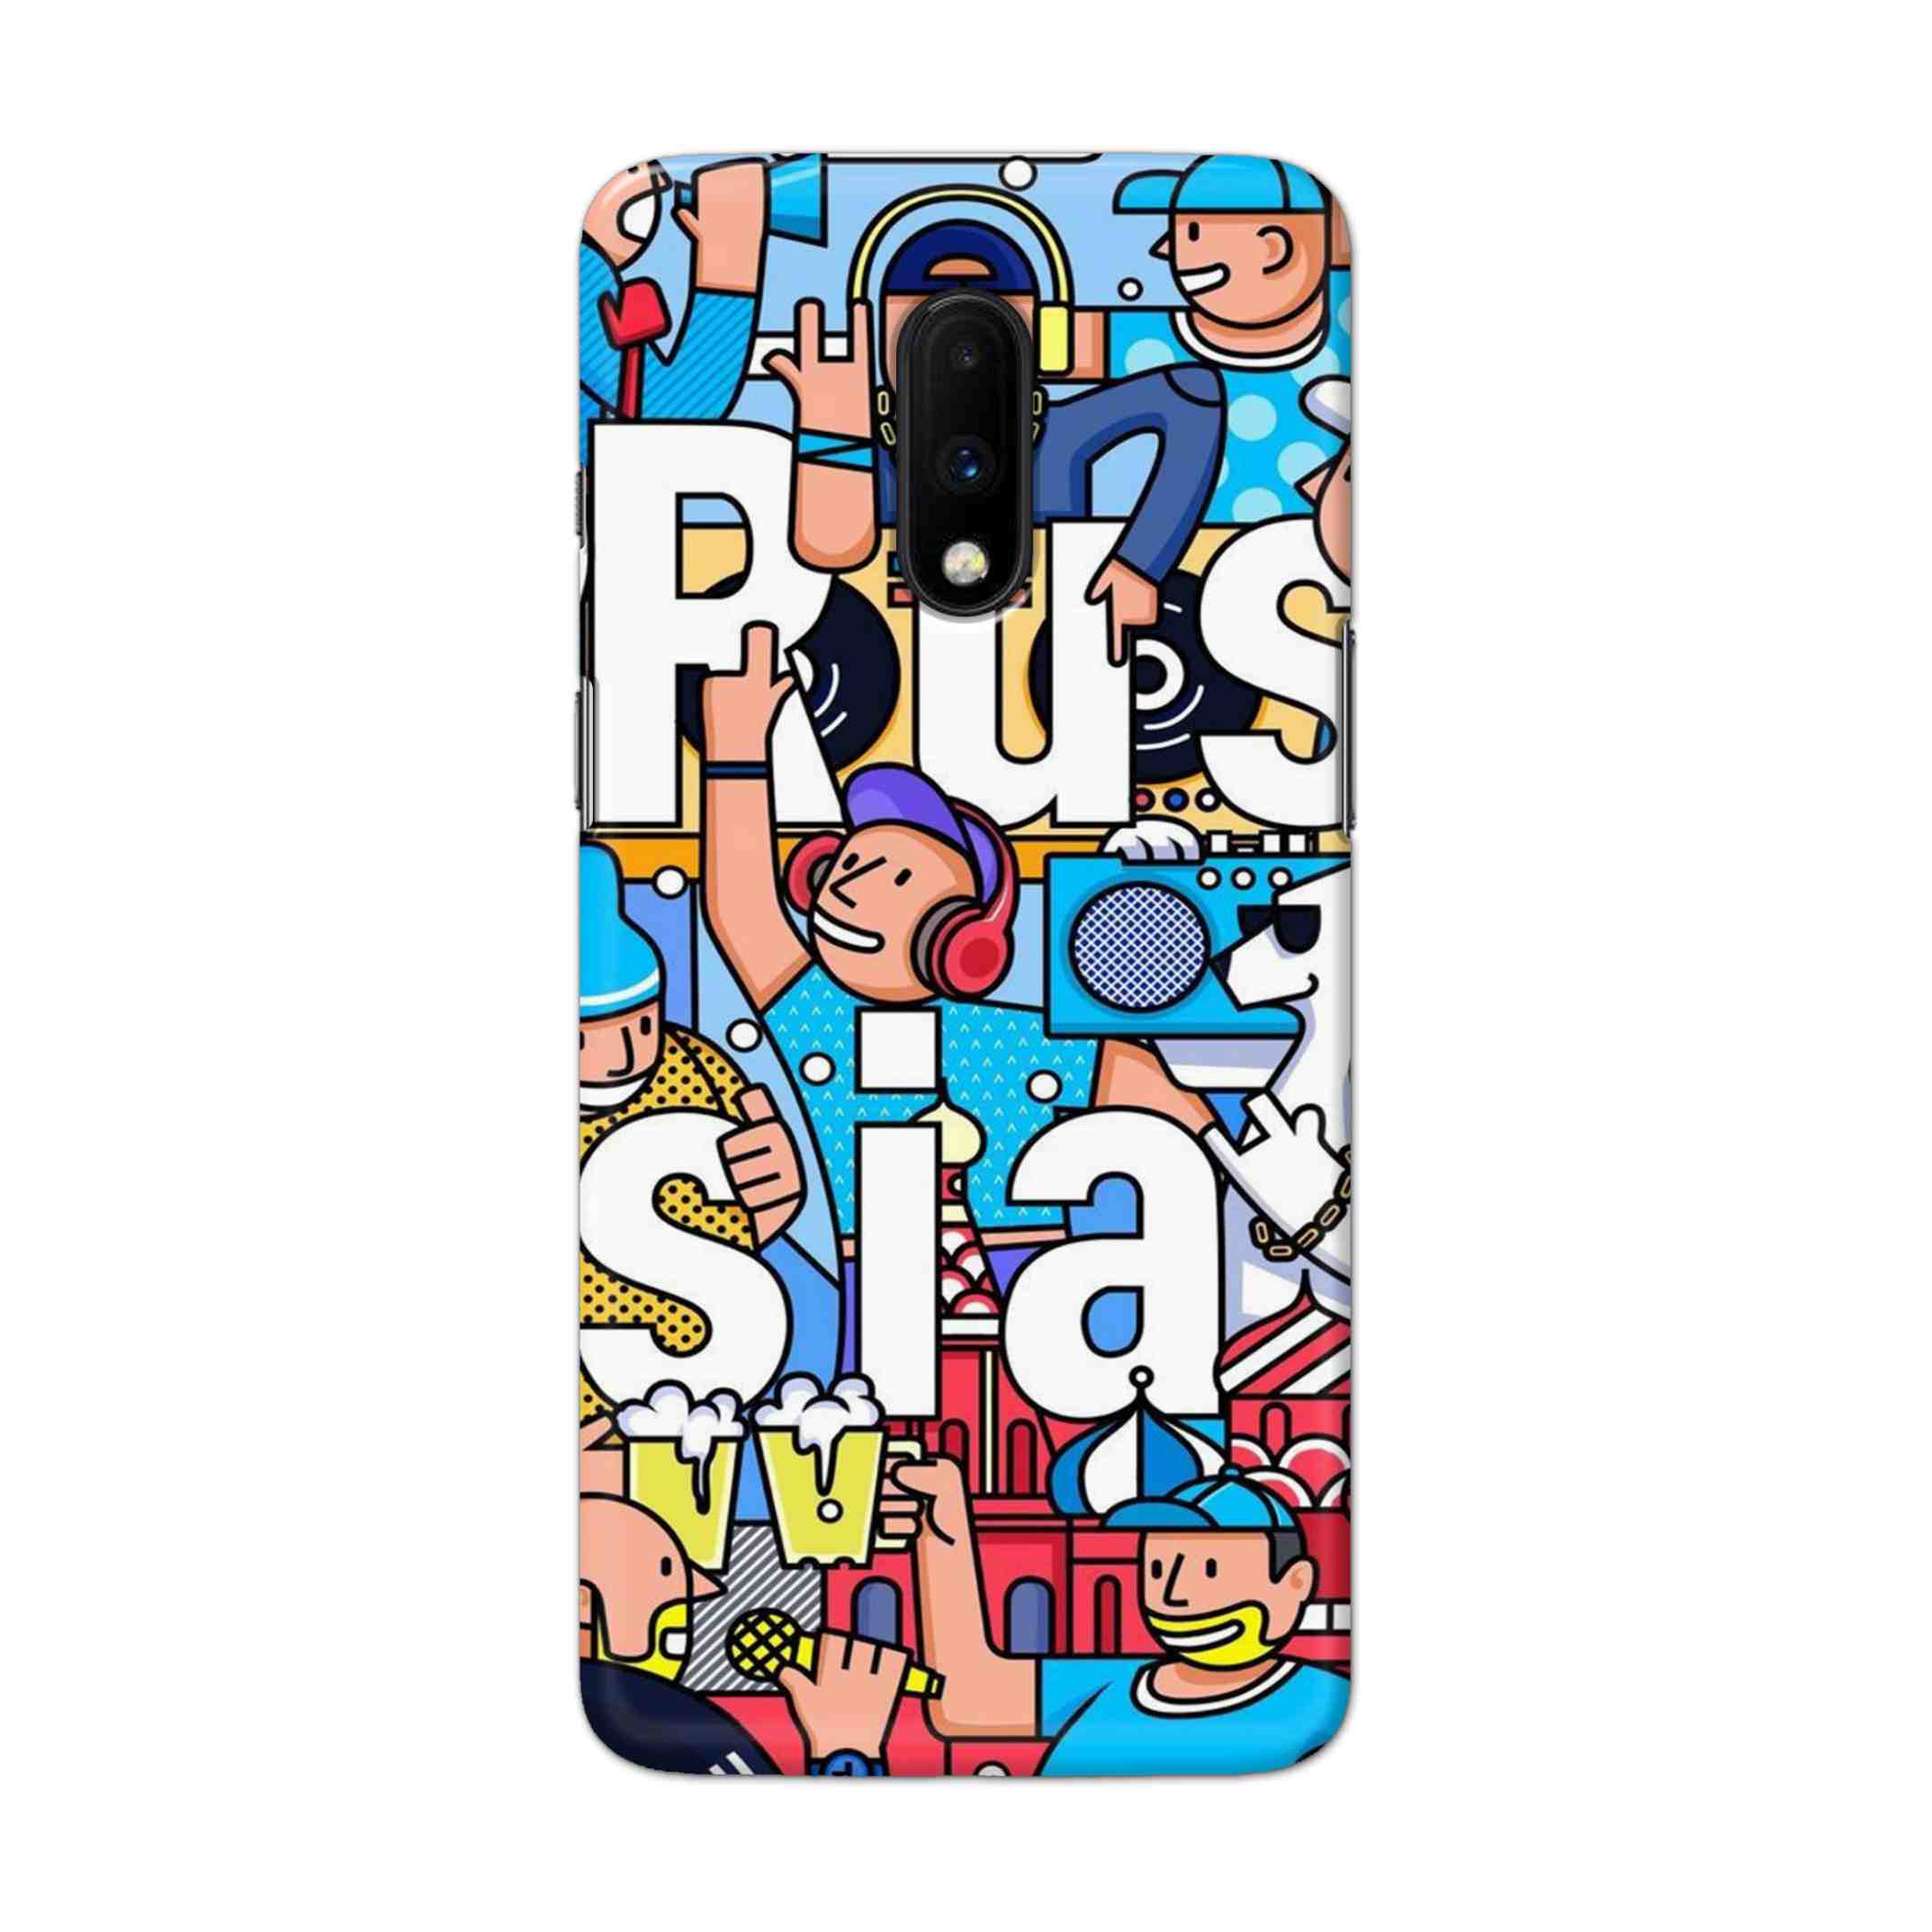 Buy Russia Hard Back Mobile Phone Case Cover For OnePlus 7 Online